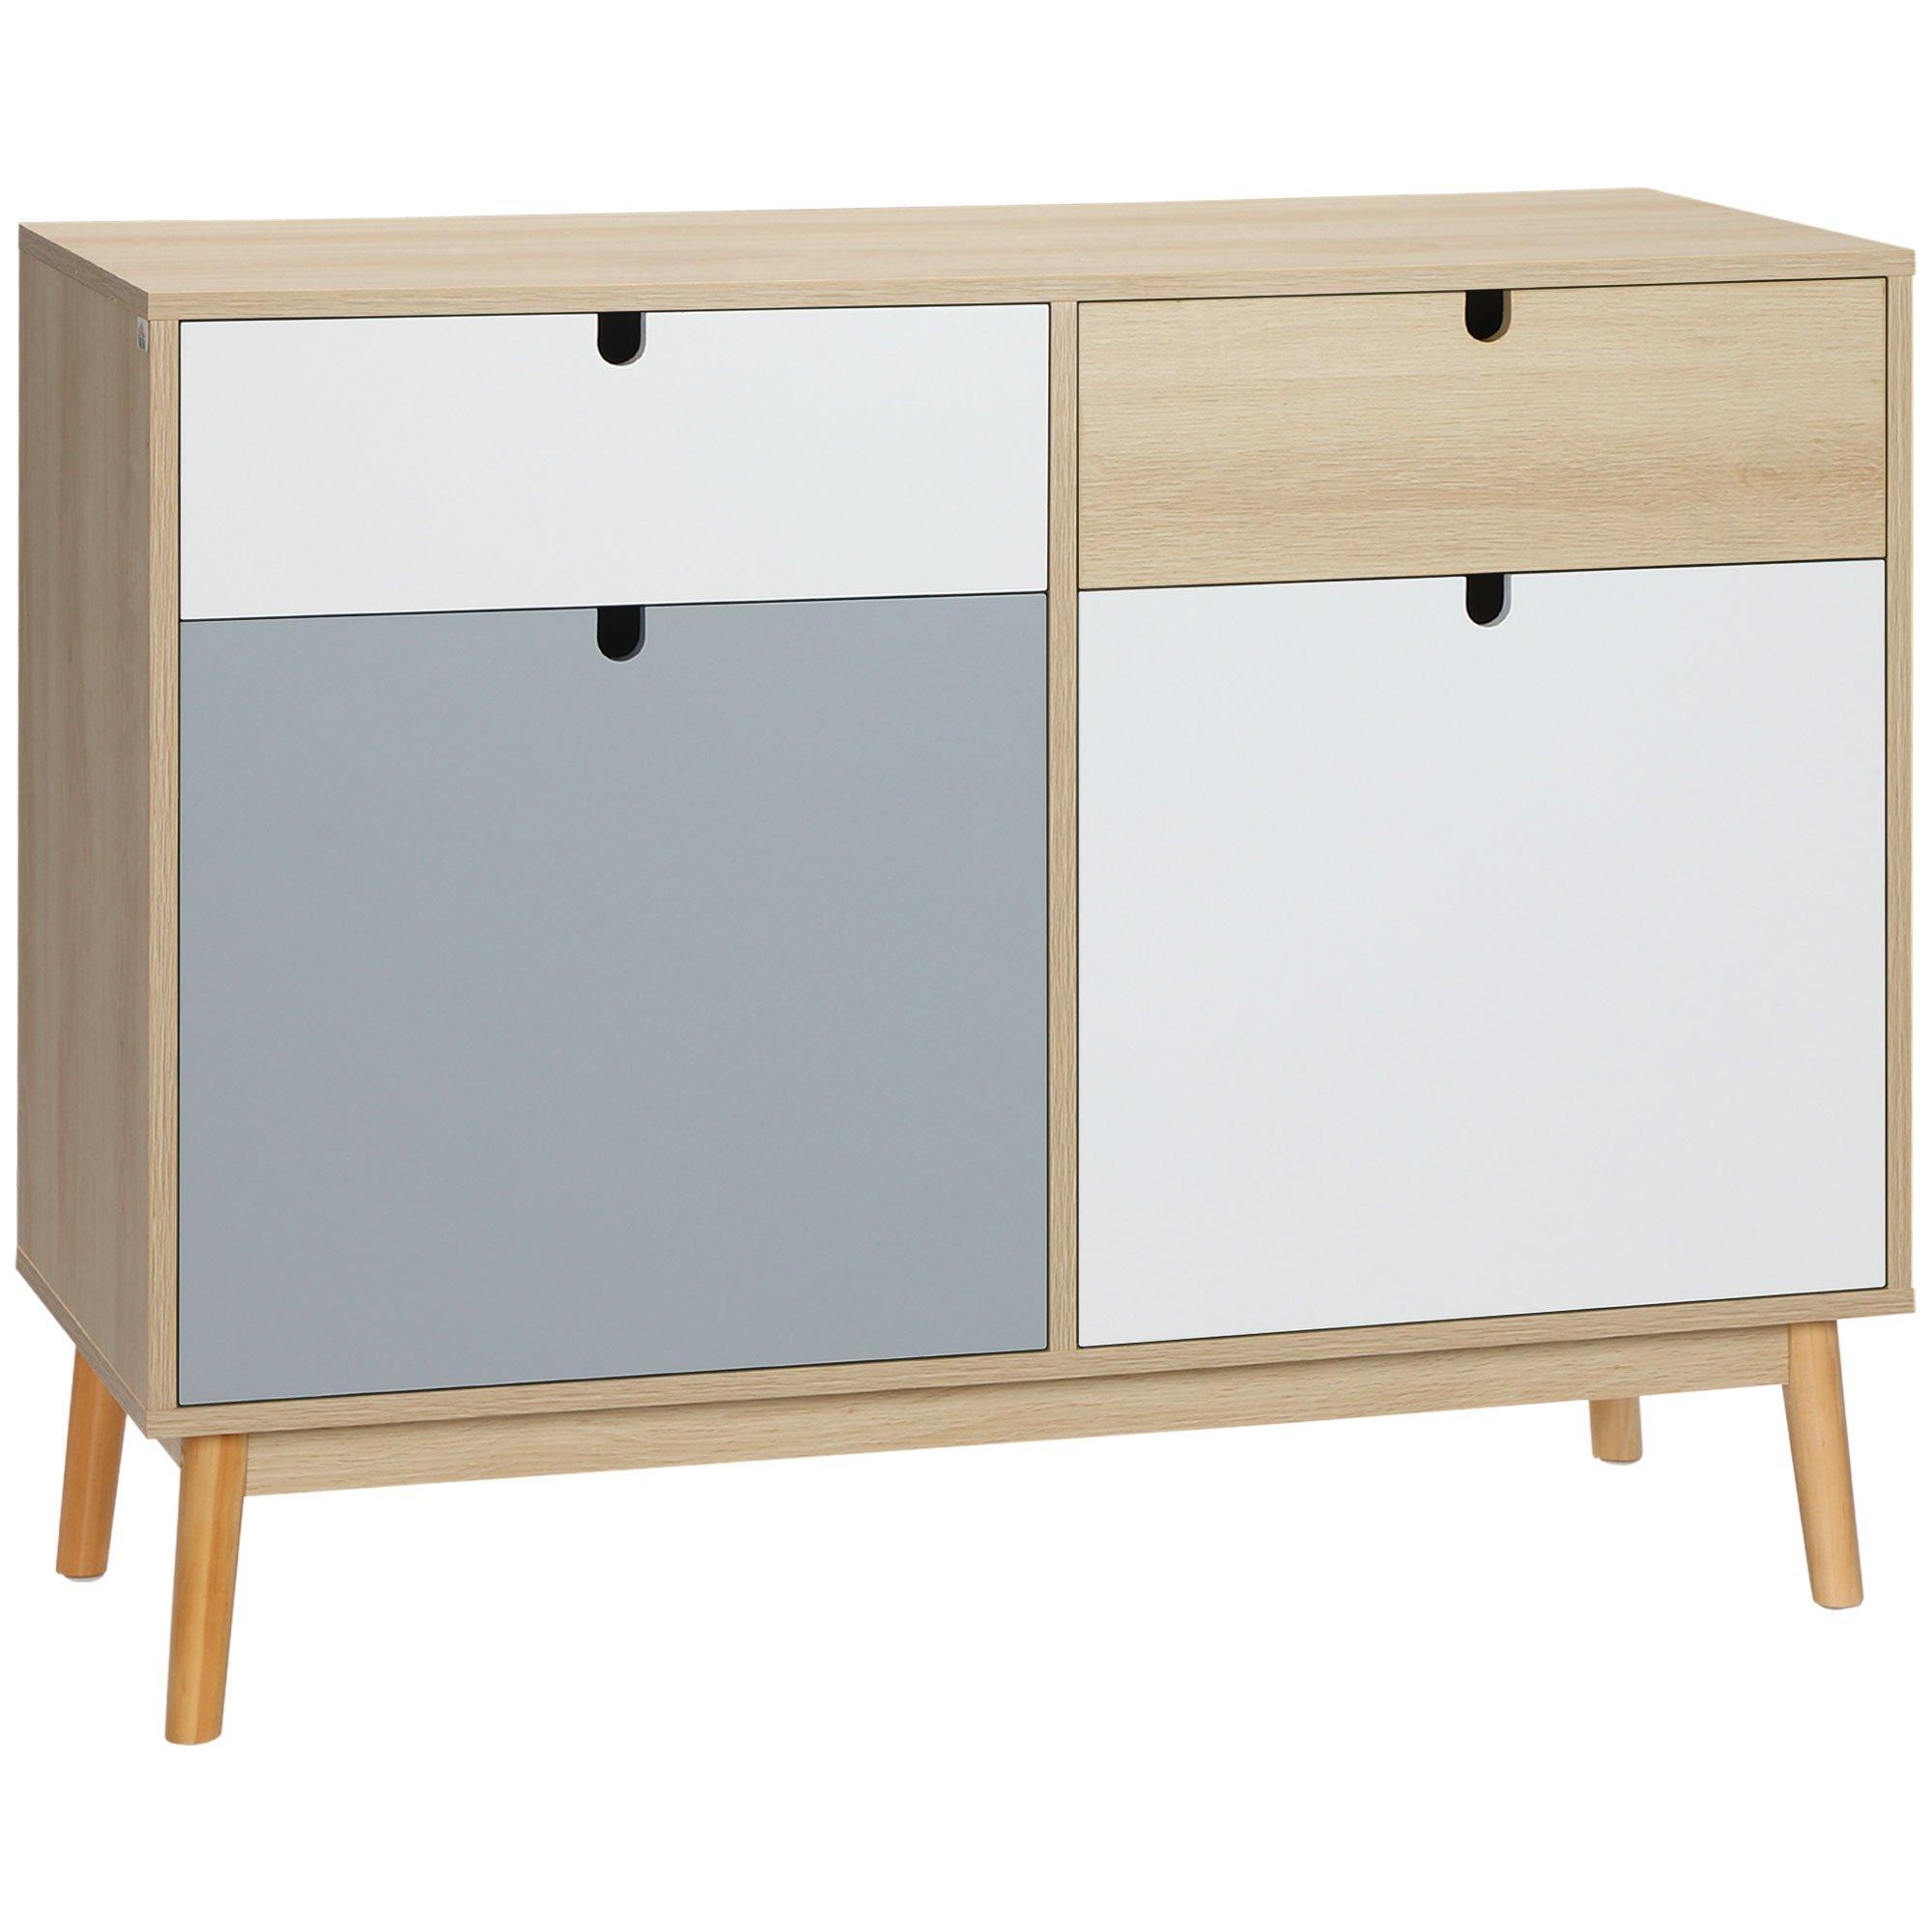 Sideboard Storage Cabinet Kitchen Cupboard with Drawers for Bedroom